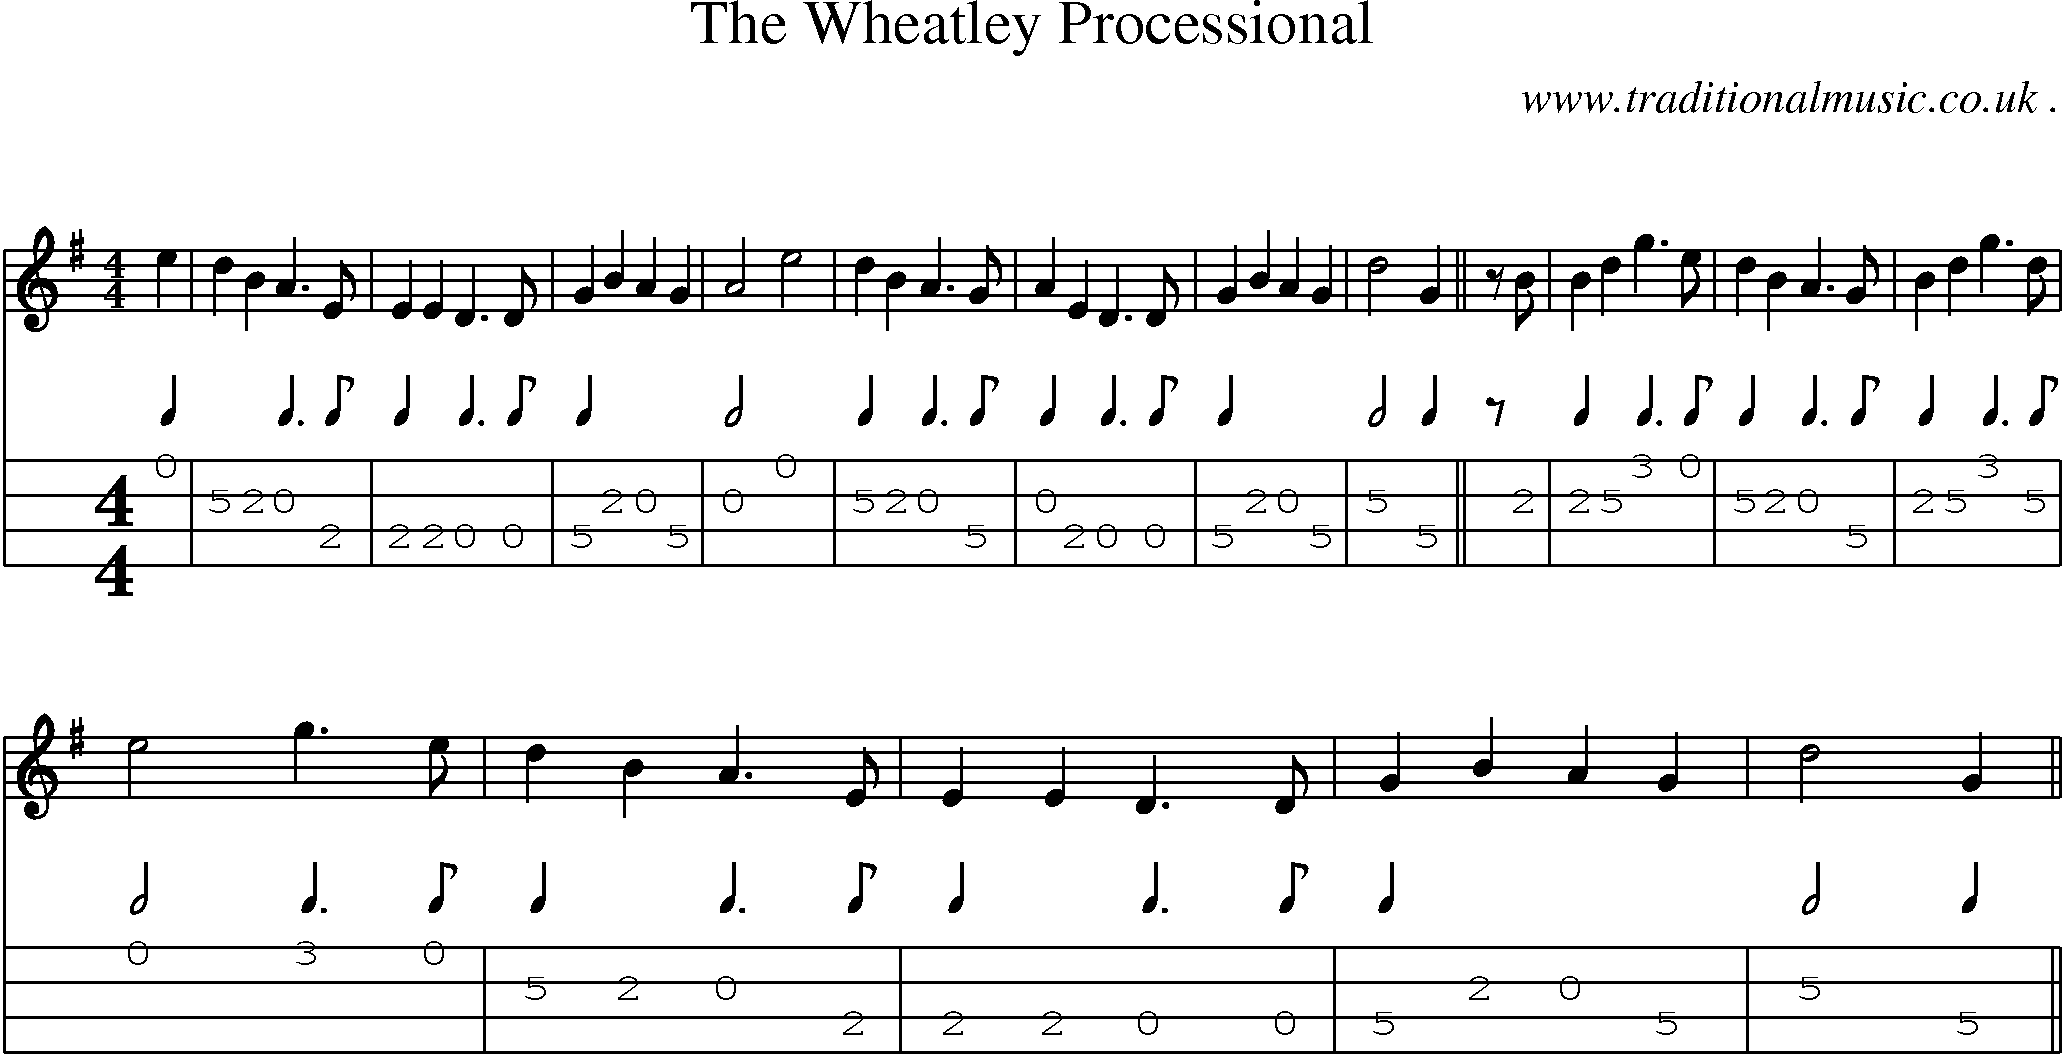 Sheet-Music and Mandolin Tabs for The Wheatley Processional